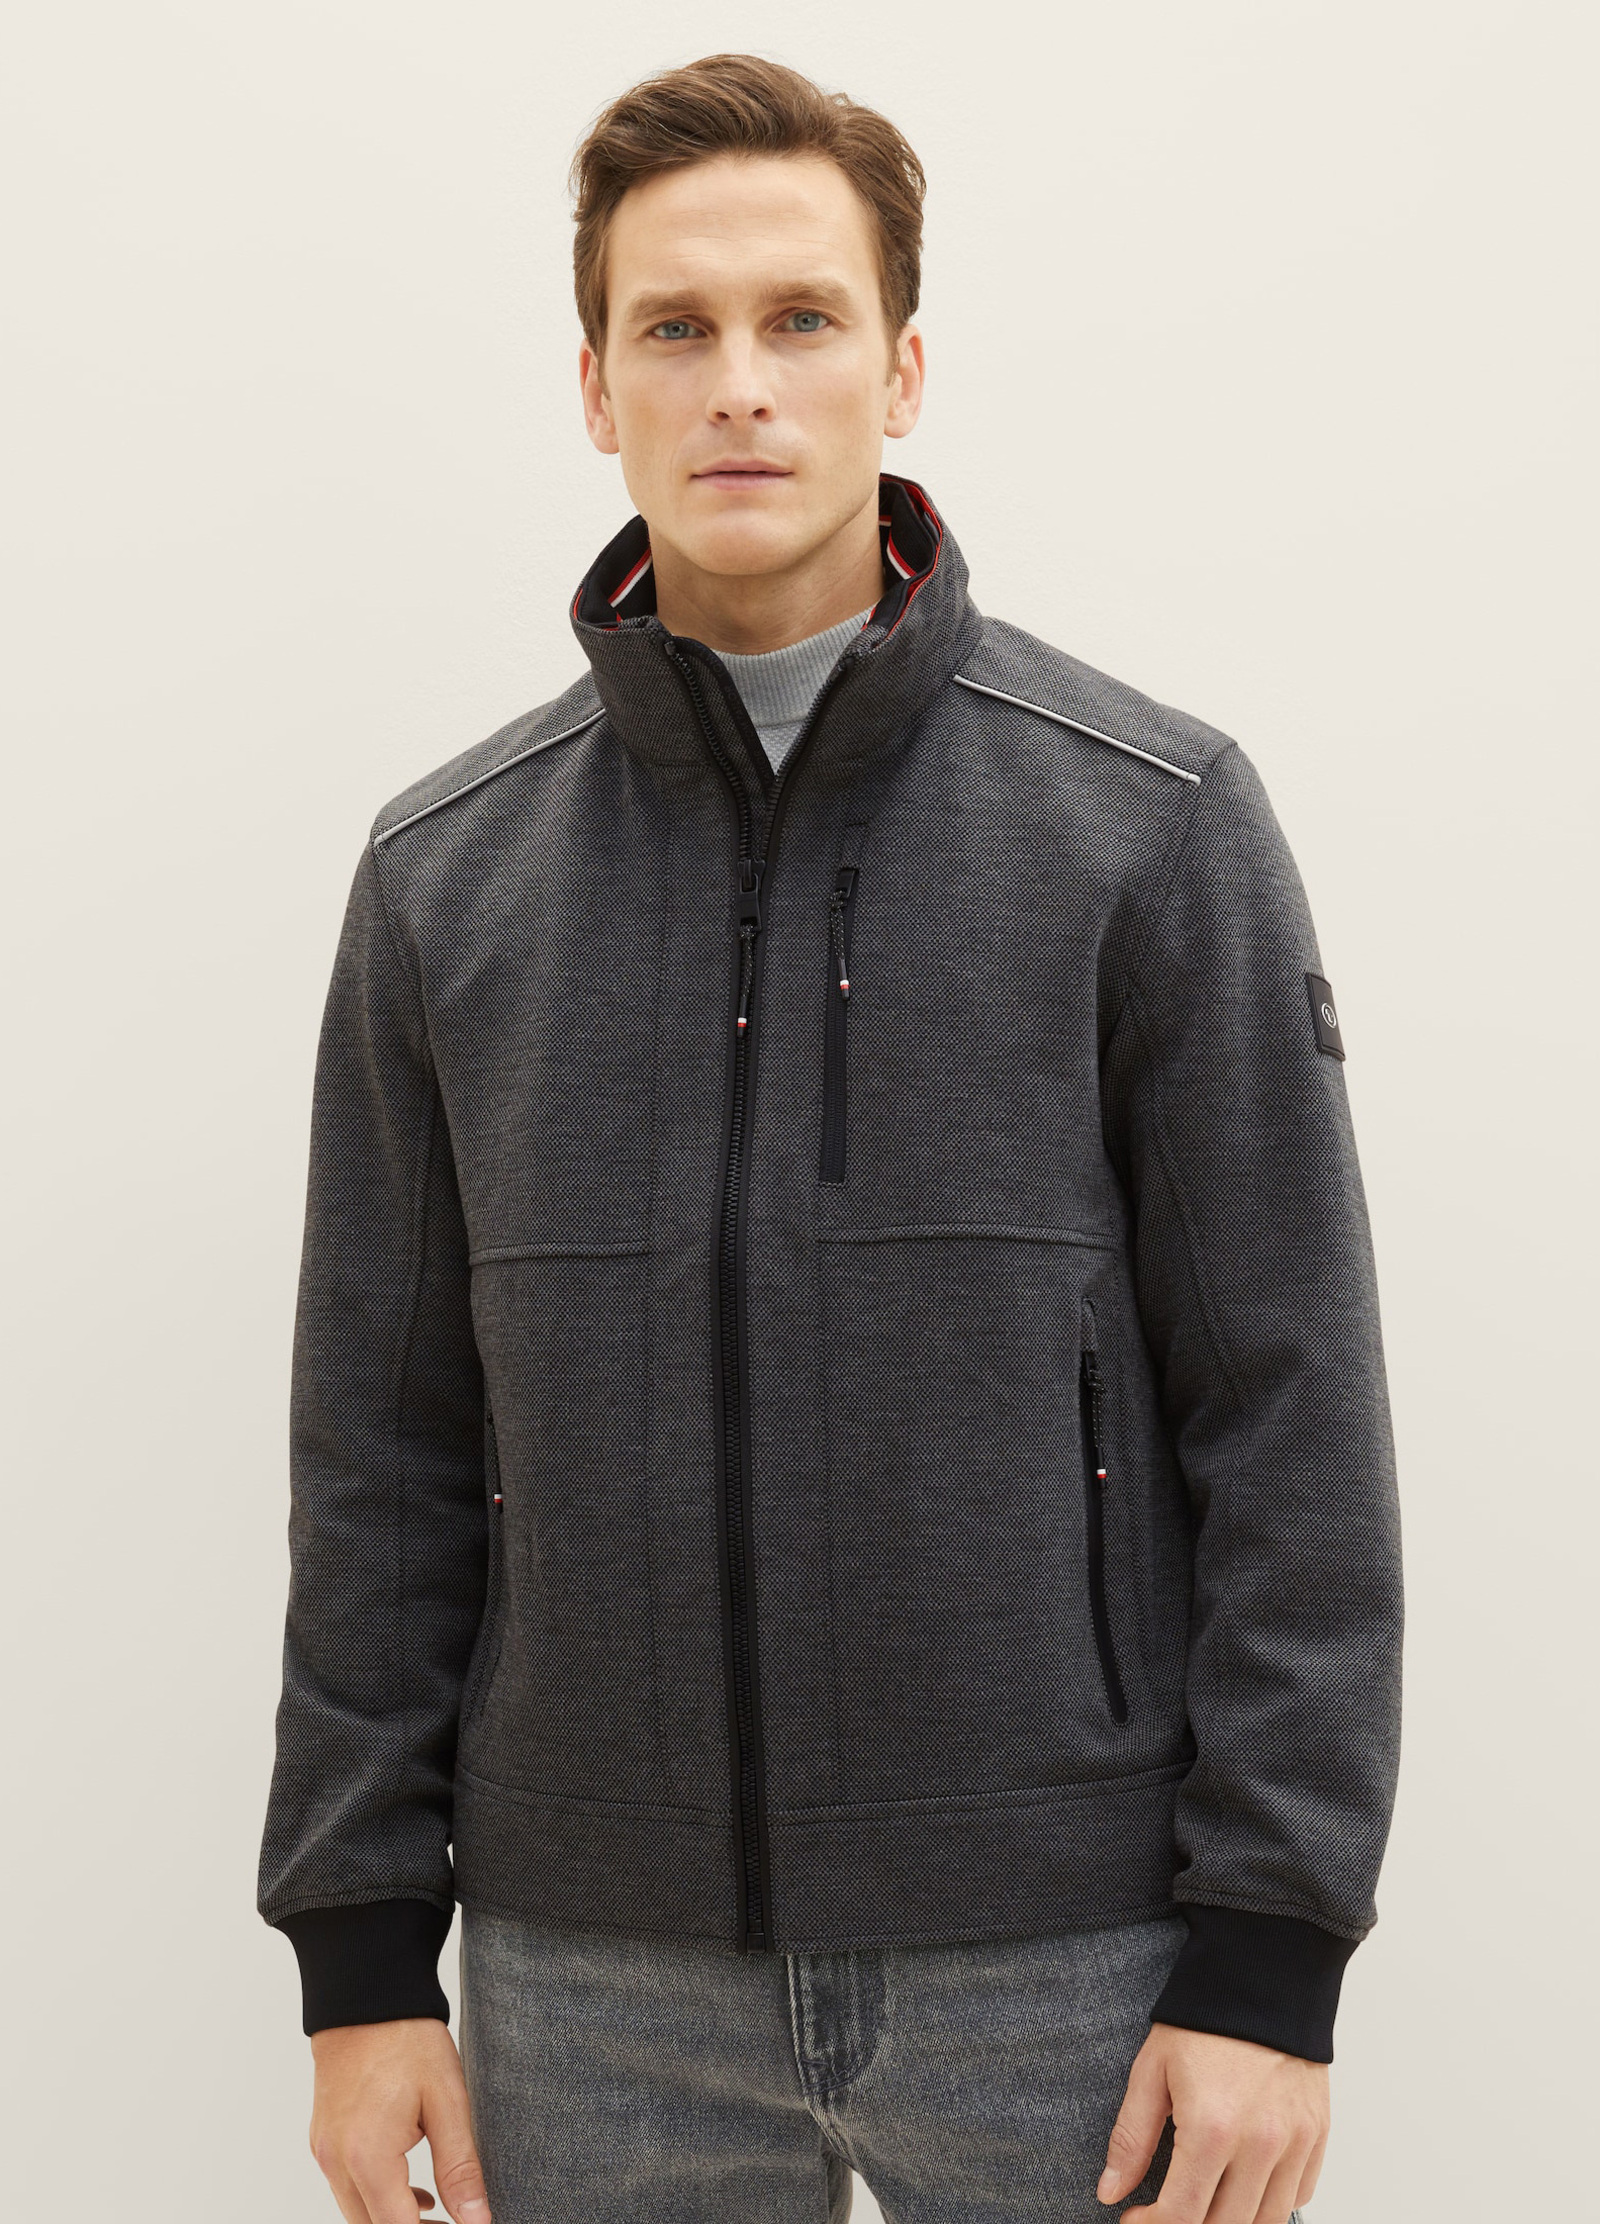 Tom Tailor Jacket With A Concealed Hood Anthracite Knitted Structure - 1037324-31109